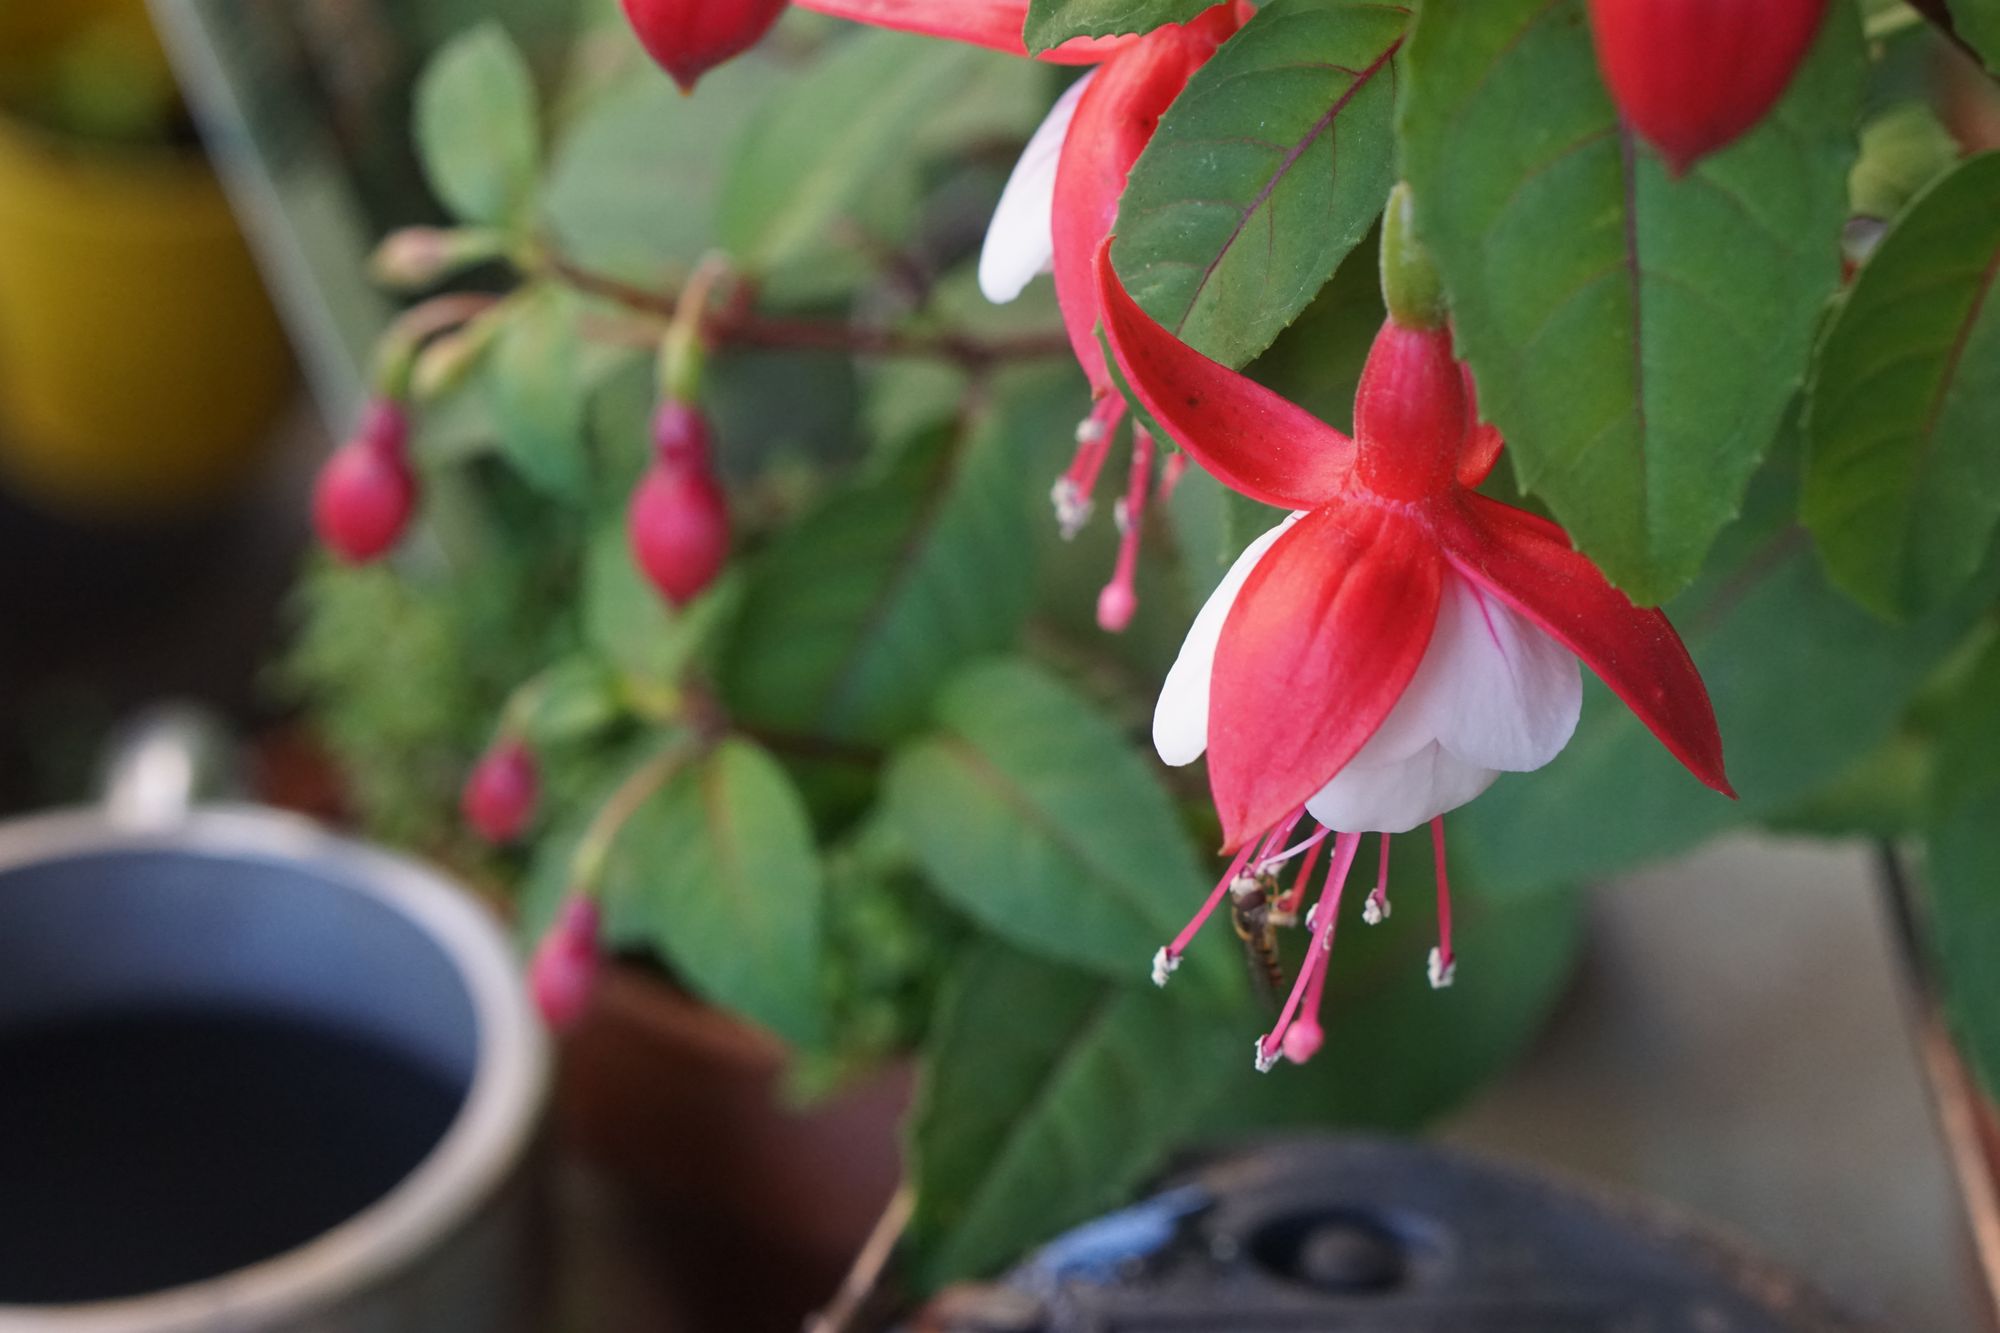 A fuchsia with flowers that have red sepals, white petals, and red filaments. A small insect is pollinating it.